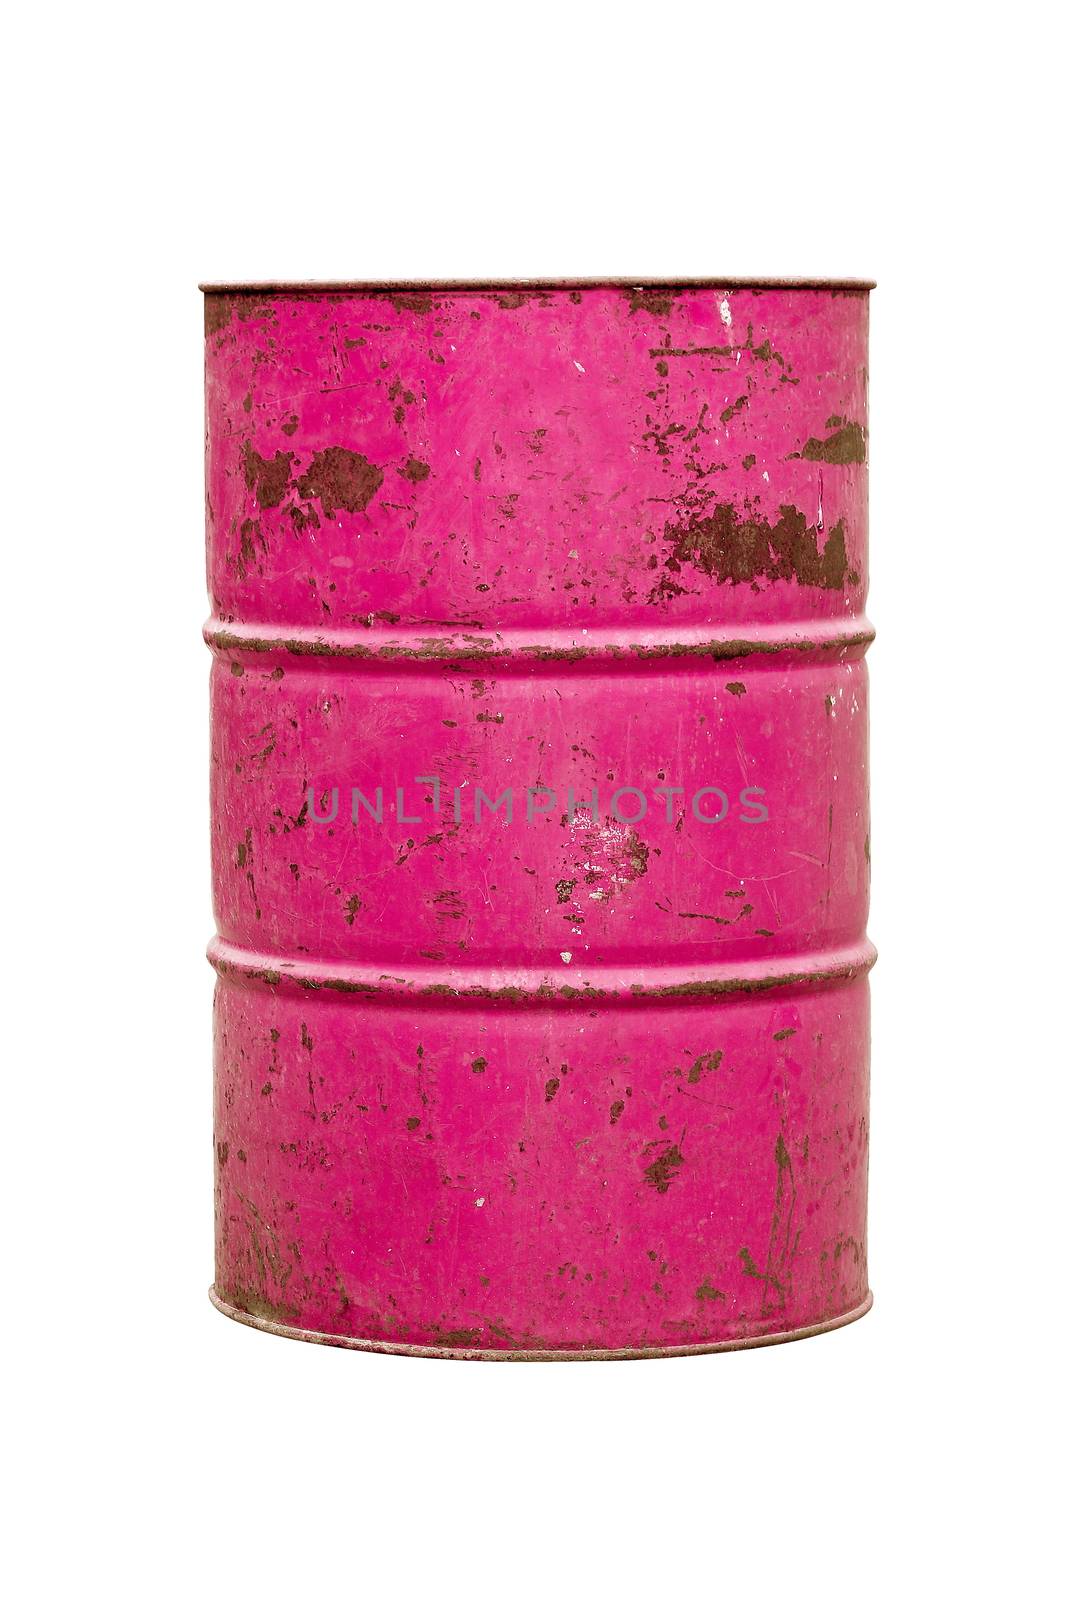 Barrel Oil pink Old isolated on background white